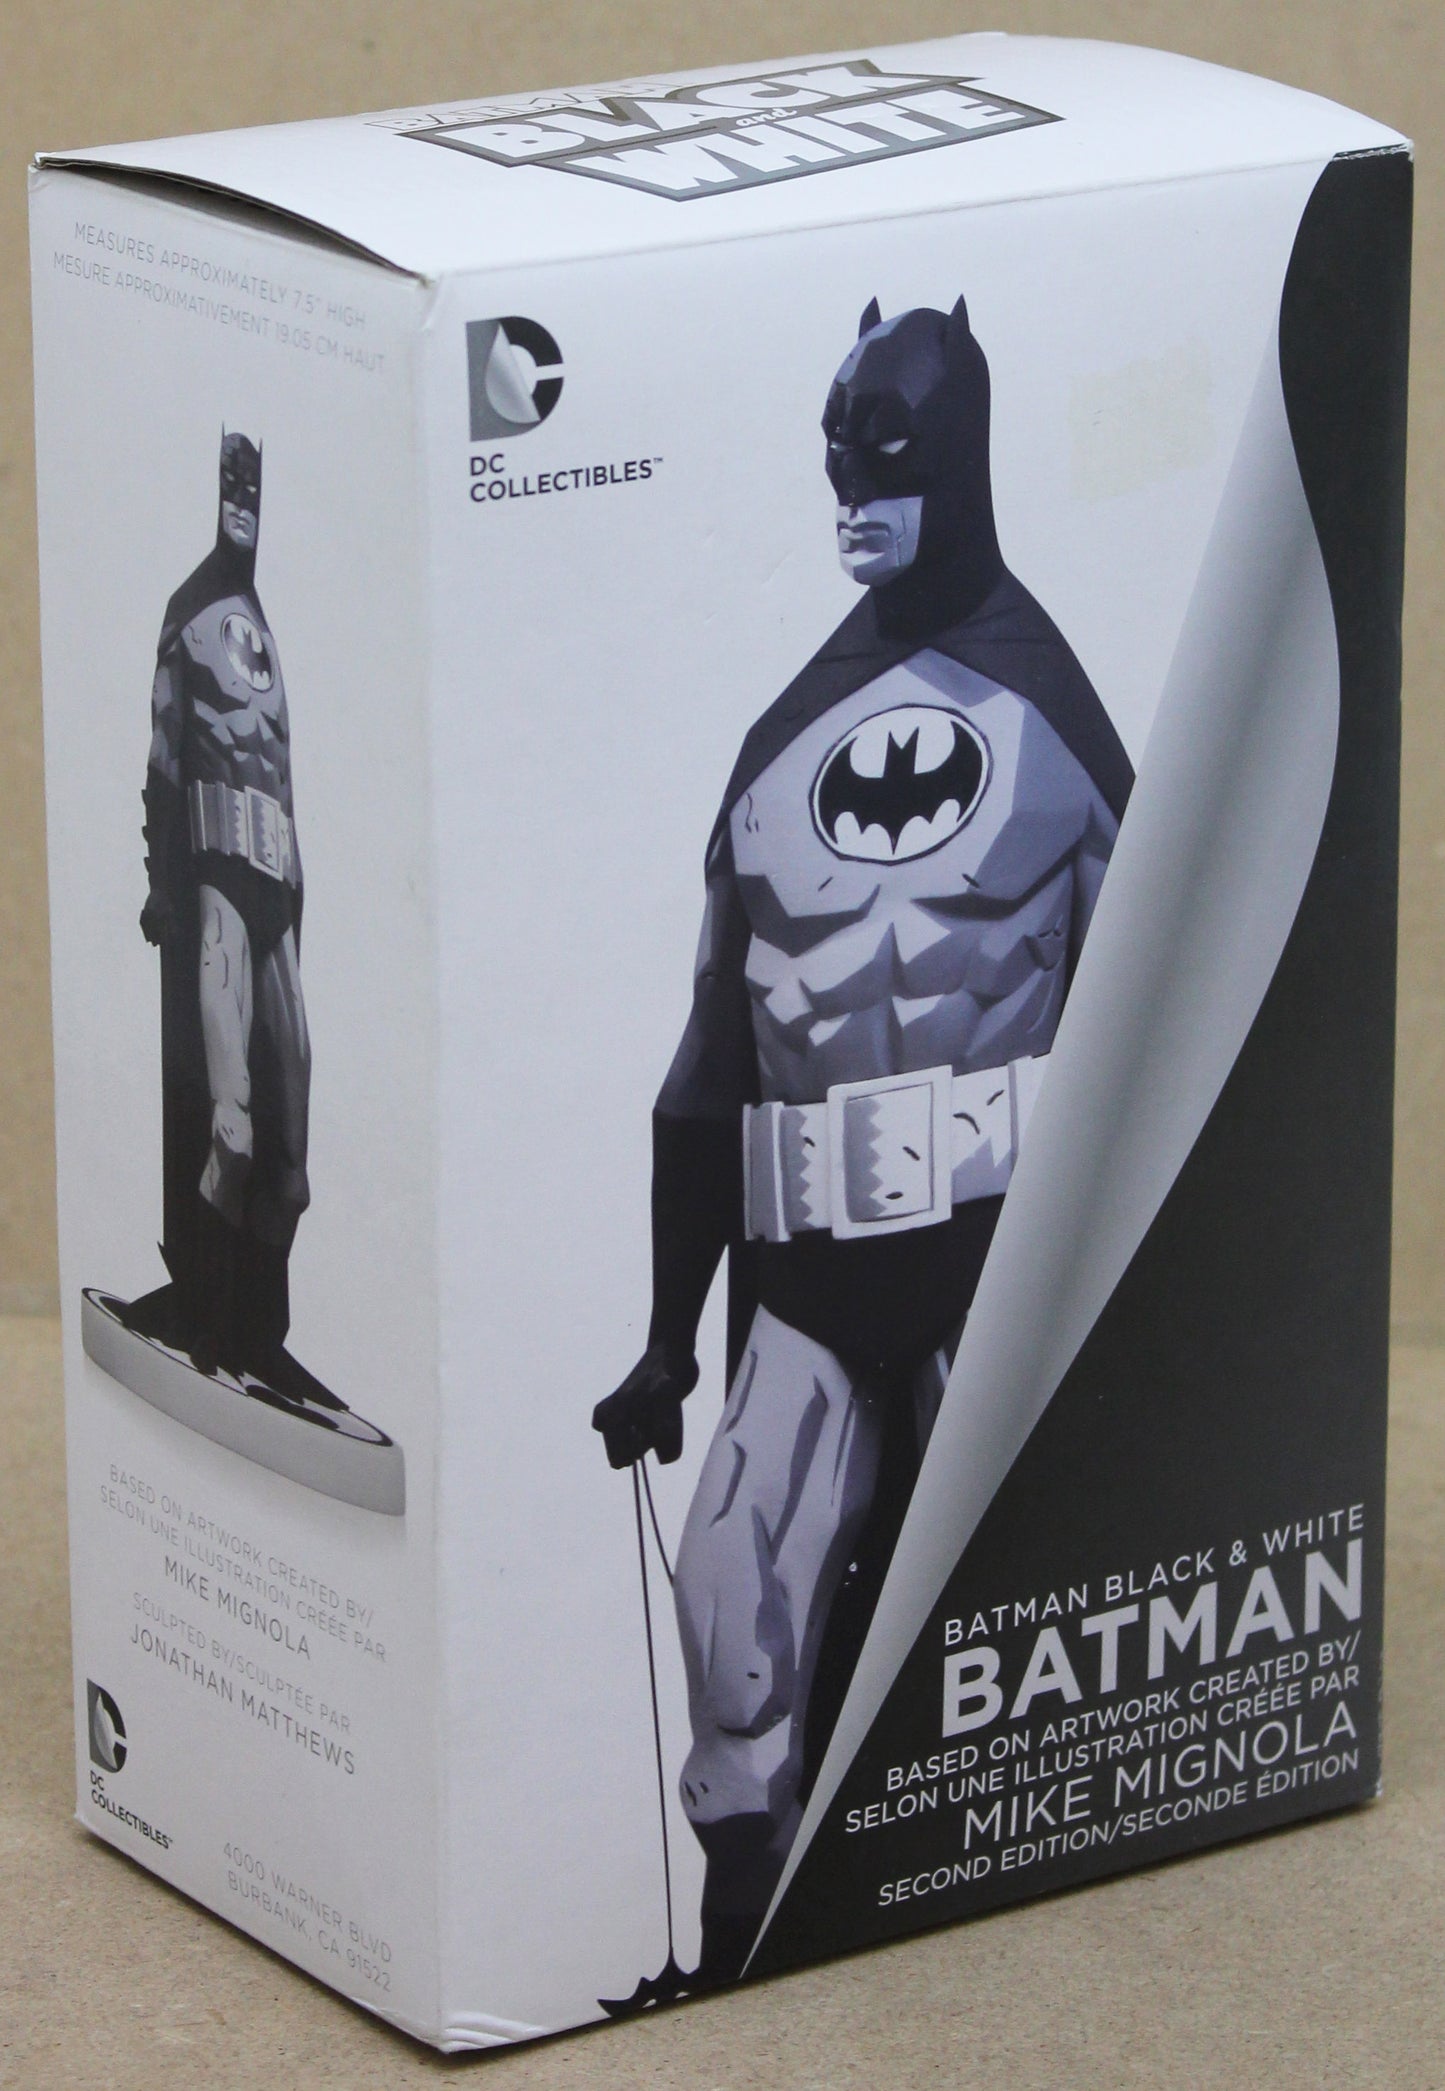 Batman Statue Black and White by Mike Mignola